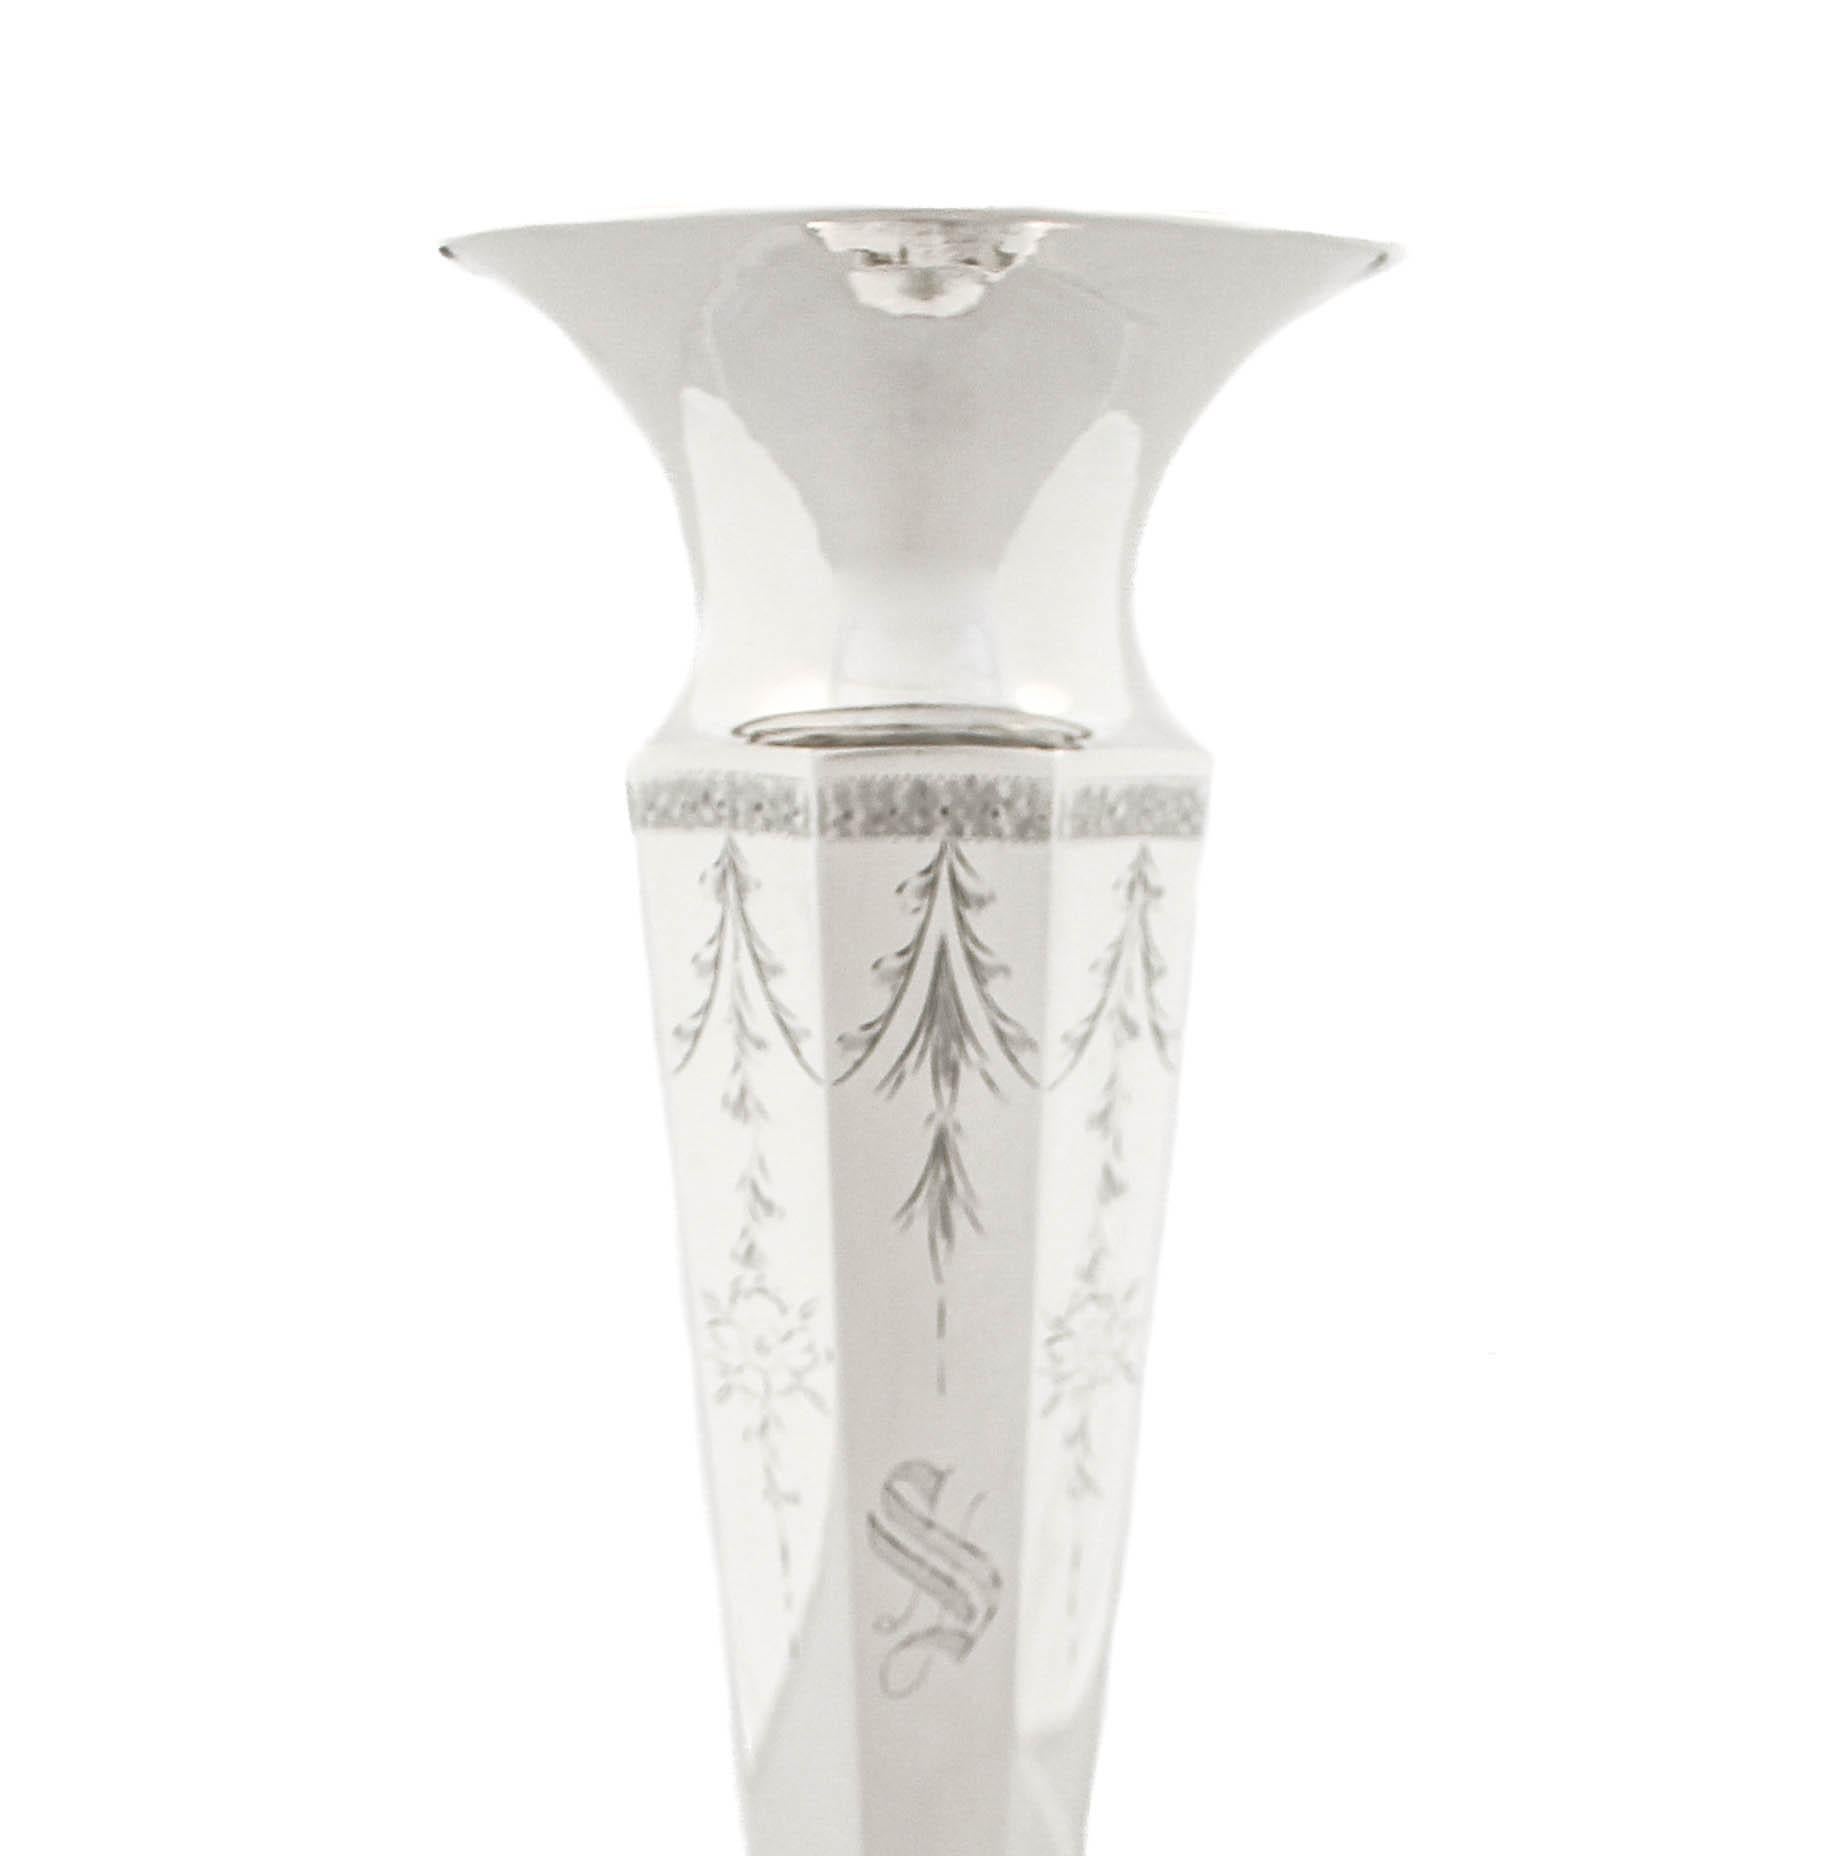 Being offered is a sterling silver vase by Victor Siedman Silver of New York.  It has a paneled design and the base (not weighted) is octagonal to mimic the body (sided).  The vase is tapered and the rim opens outwards, allowing the flowers to